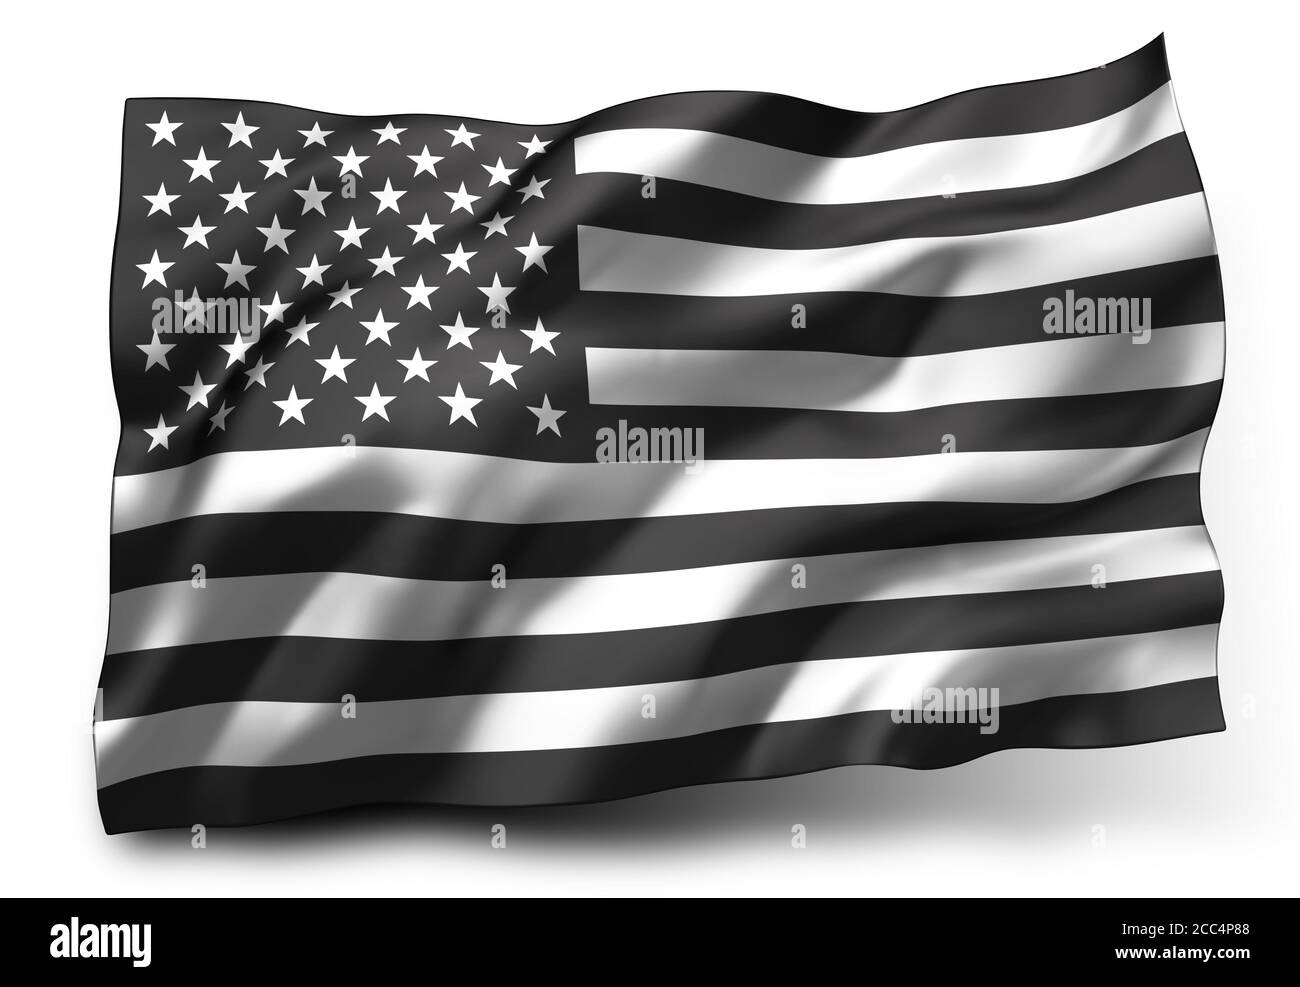 Black lives matter flag blowing in the wind. Striped black and white USA flying flag, isolated on white background. 3D illustration. Stock Photo